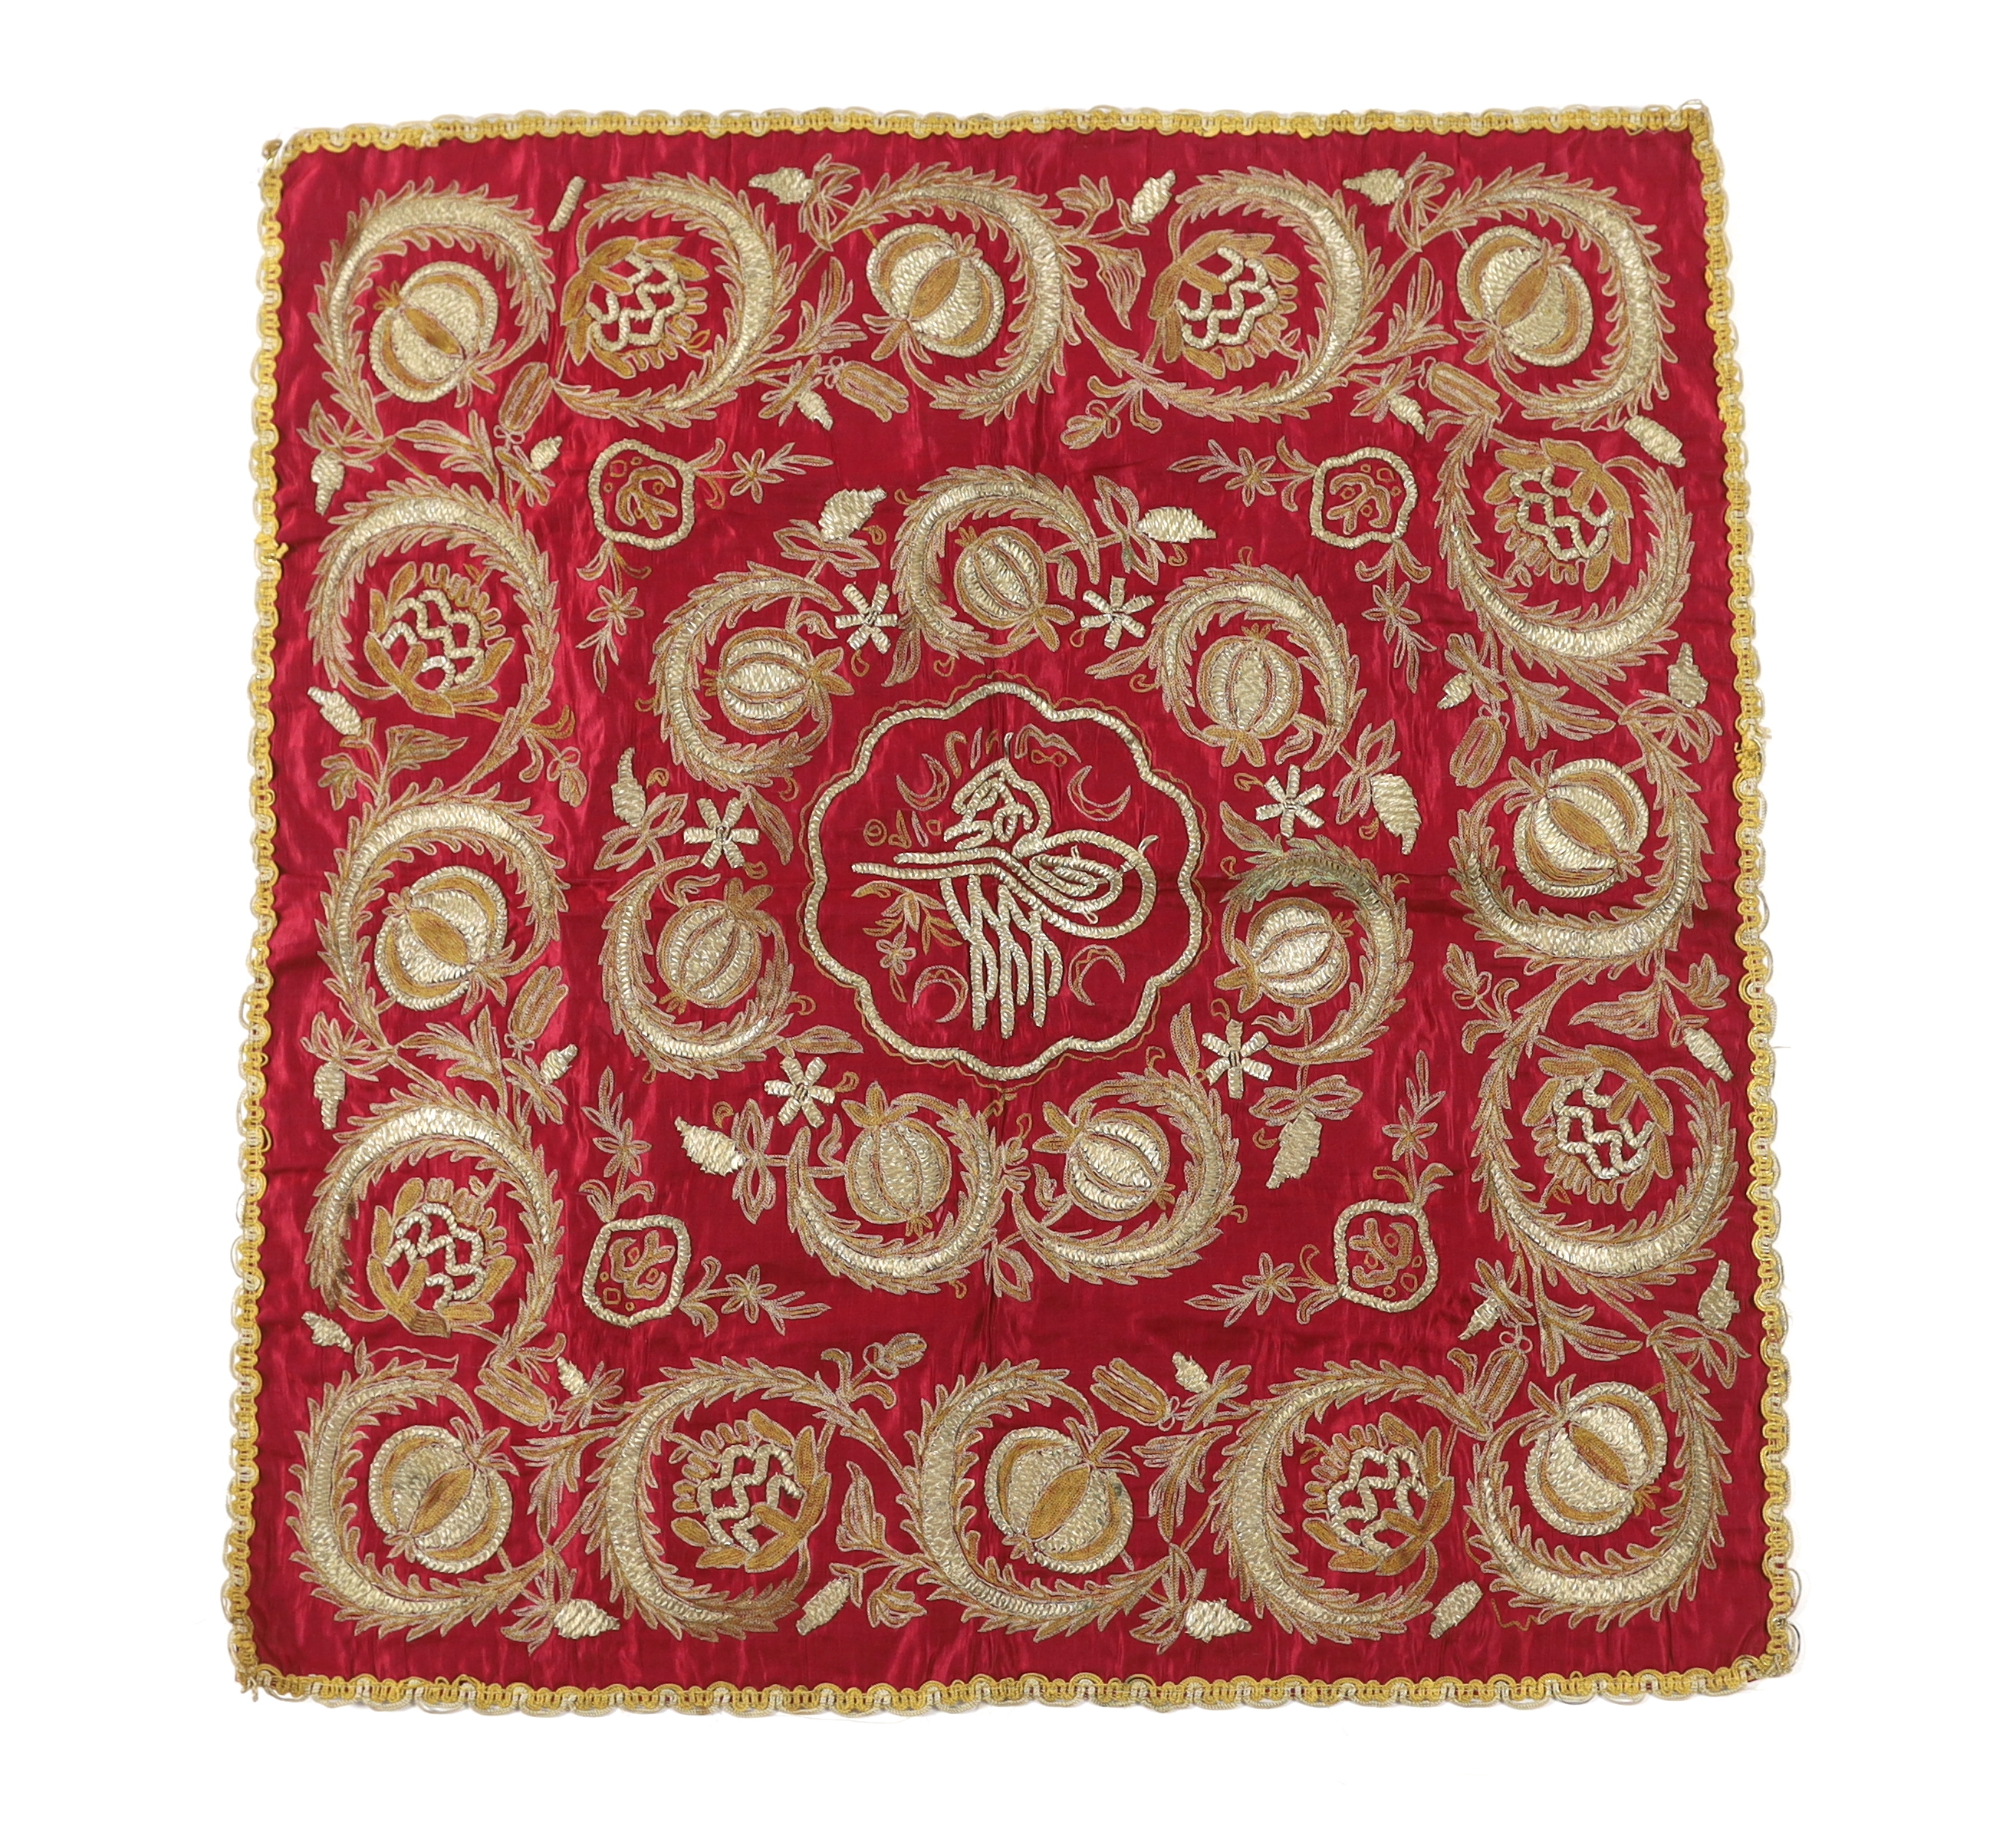 A late 19th century red silk Ottoman metallic thread embroidered cover worked in chain stitch and thick raised embroidery of pomegranate design with a central cartouche, braiding possibly added later, backed with fine li